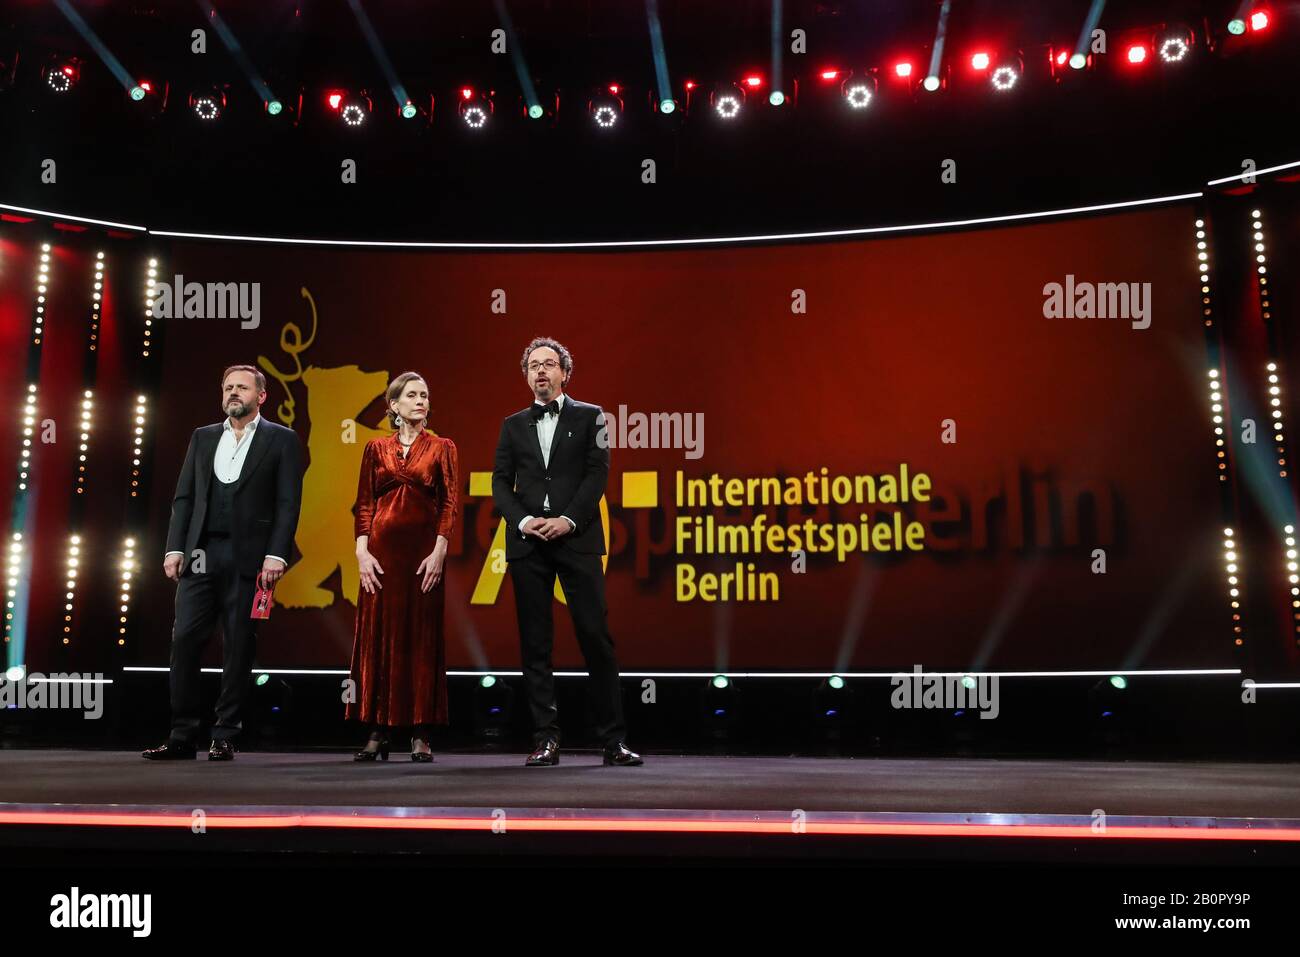 (200221) -- BERLIN, Feb. 21, 2020 (Xinhua) -- Berlinale Executive Director Mariette Rissenbeek (C) and Berlinale Artistic Director Carlo Chatrian (R) attend the opening ceremony of the 70th Berlin International Film Festival in Berlin, capital of Germany, Feb. 20, 2020. The 70th Berlin International Film Festival, or as it's more commonly known, the Berlinale, kicked off on Thursday with a literary drama 'My Salinger Year'.A total of 18 films have made it into this year's competition category and they will compete for the Golden Bear for best film, and other individual awards, the Silver Bears Stock Photo